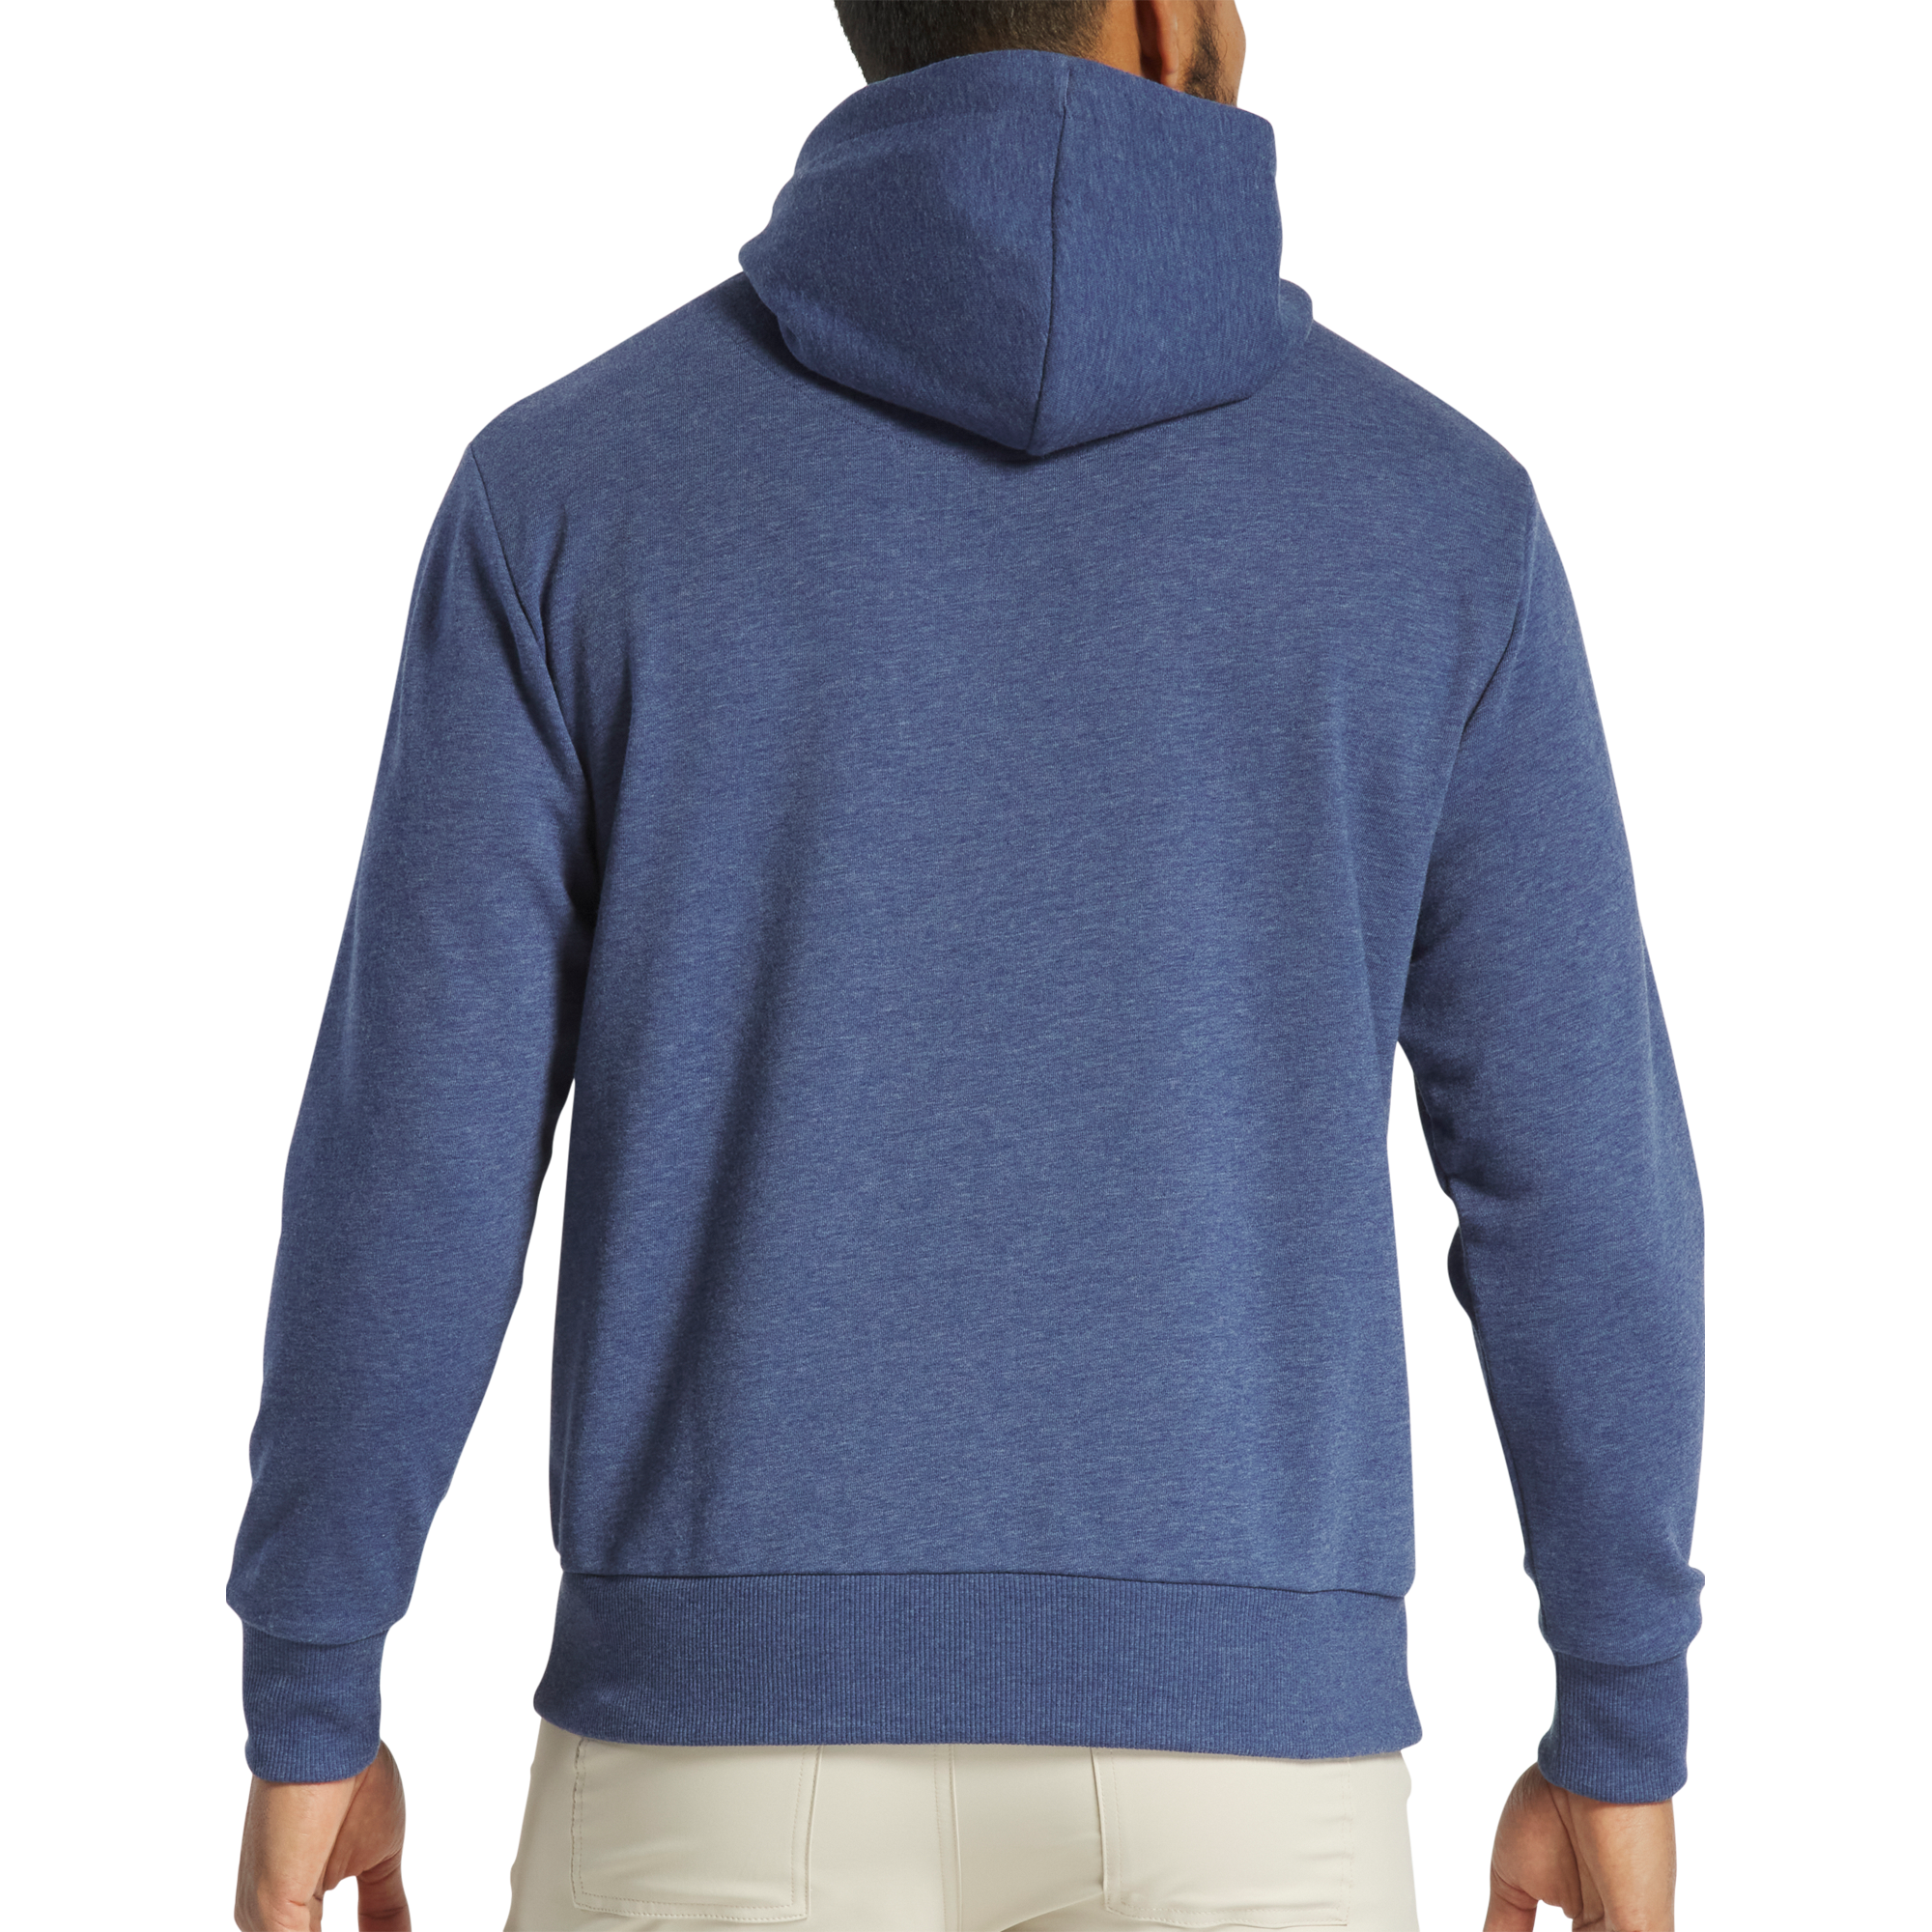 152:a Open Championship Postage Stamp Hoodie